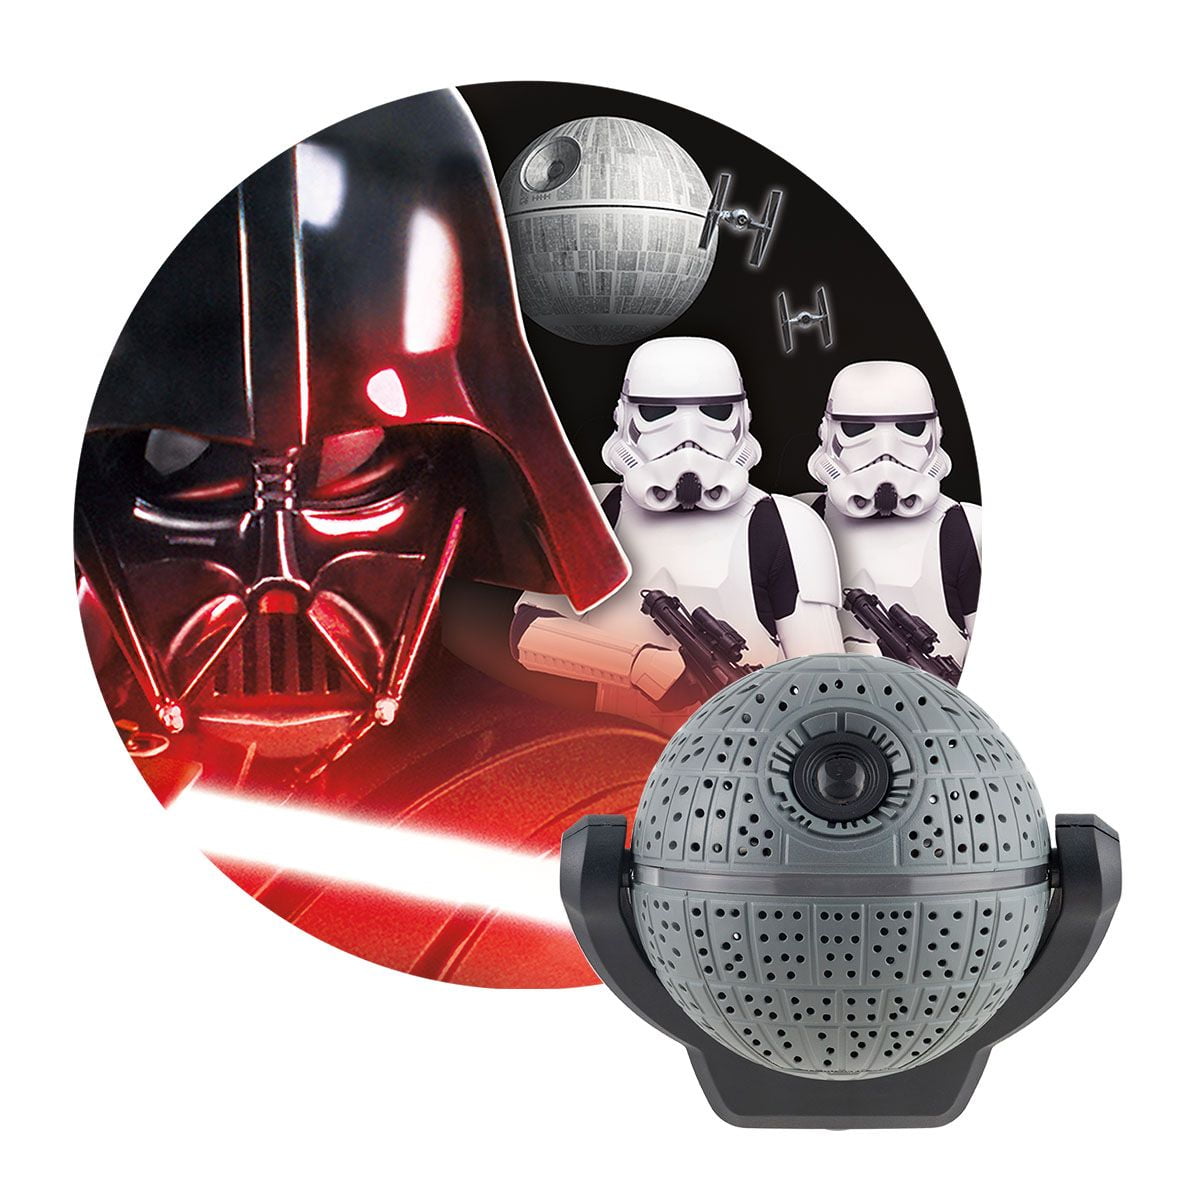 STAR WARS DEATH STAR DARTH VADER 3D Acrylic LED 7 Colour Night Light Touch Lamp 